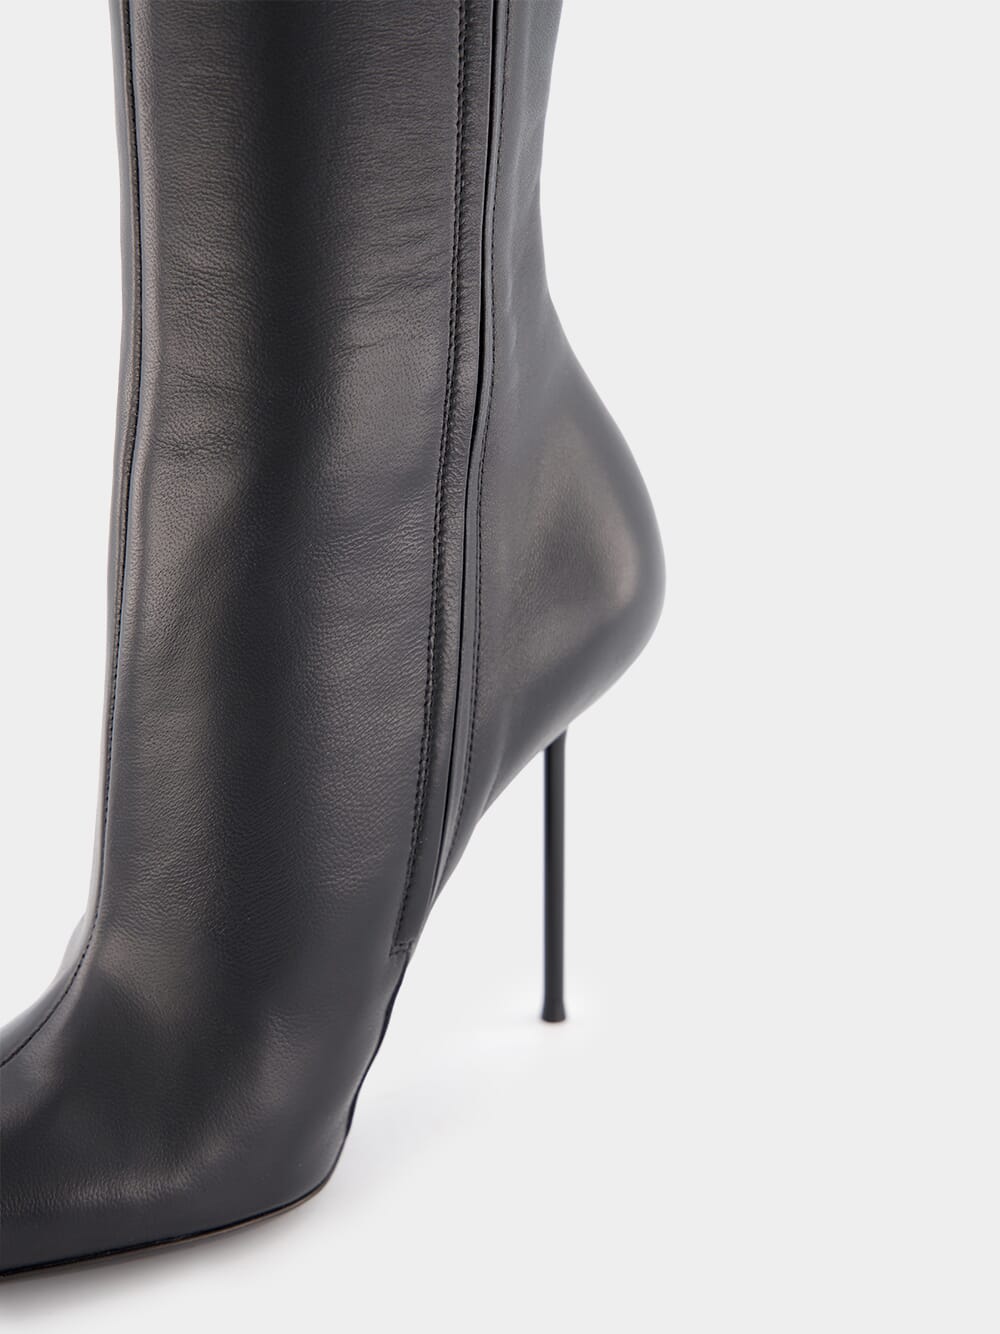 Paris TexasLidia 110mm Leather Stiletto Boots at Fashion Clinic